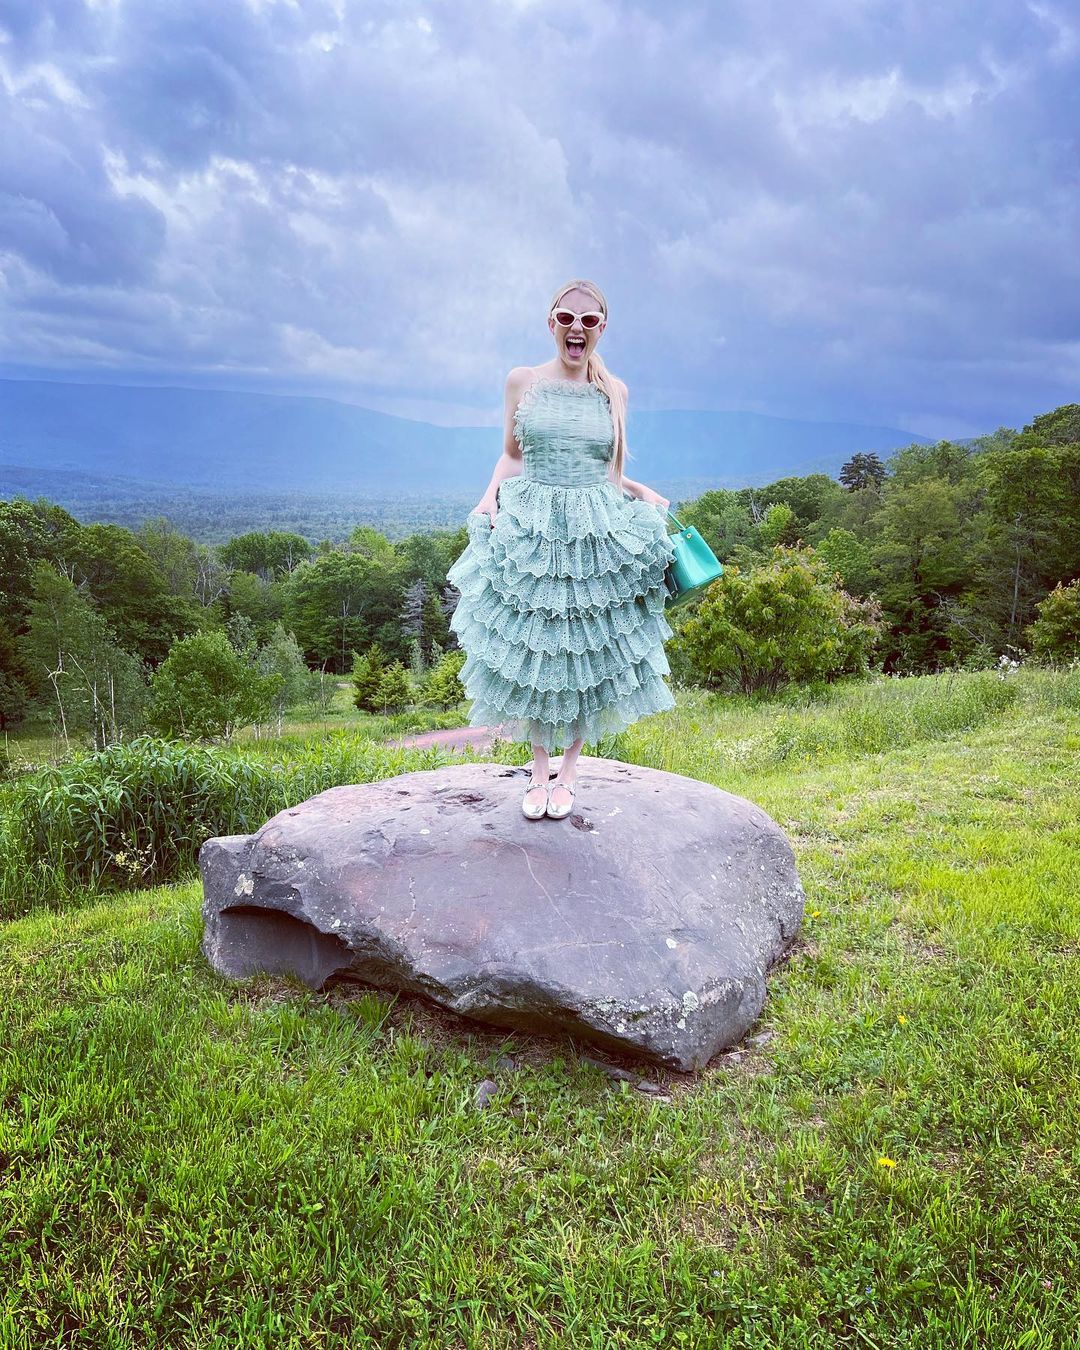 Emma Roberts strikes a silly pose on a rock.